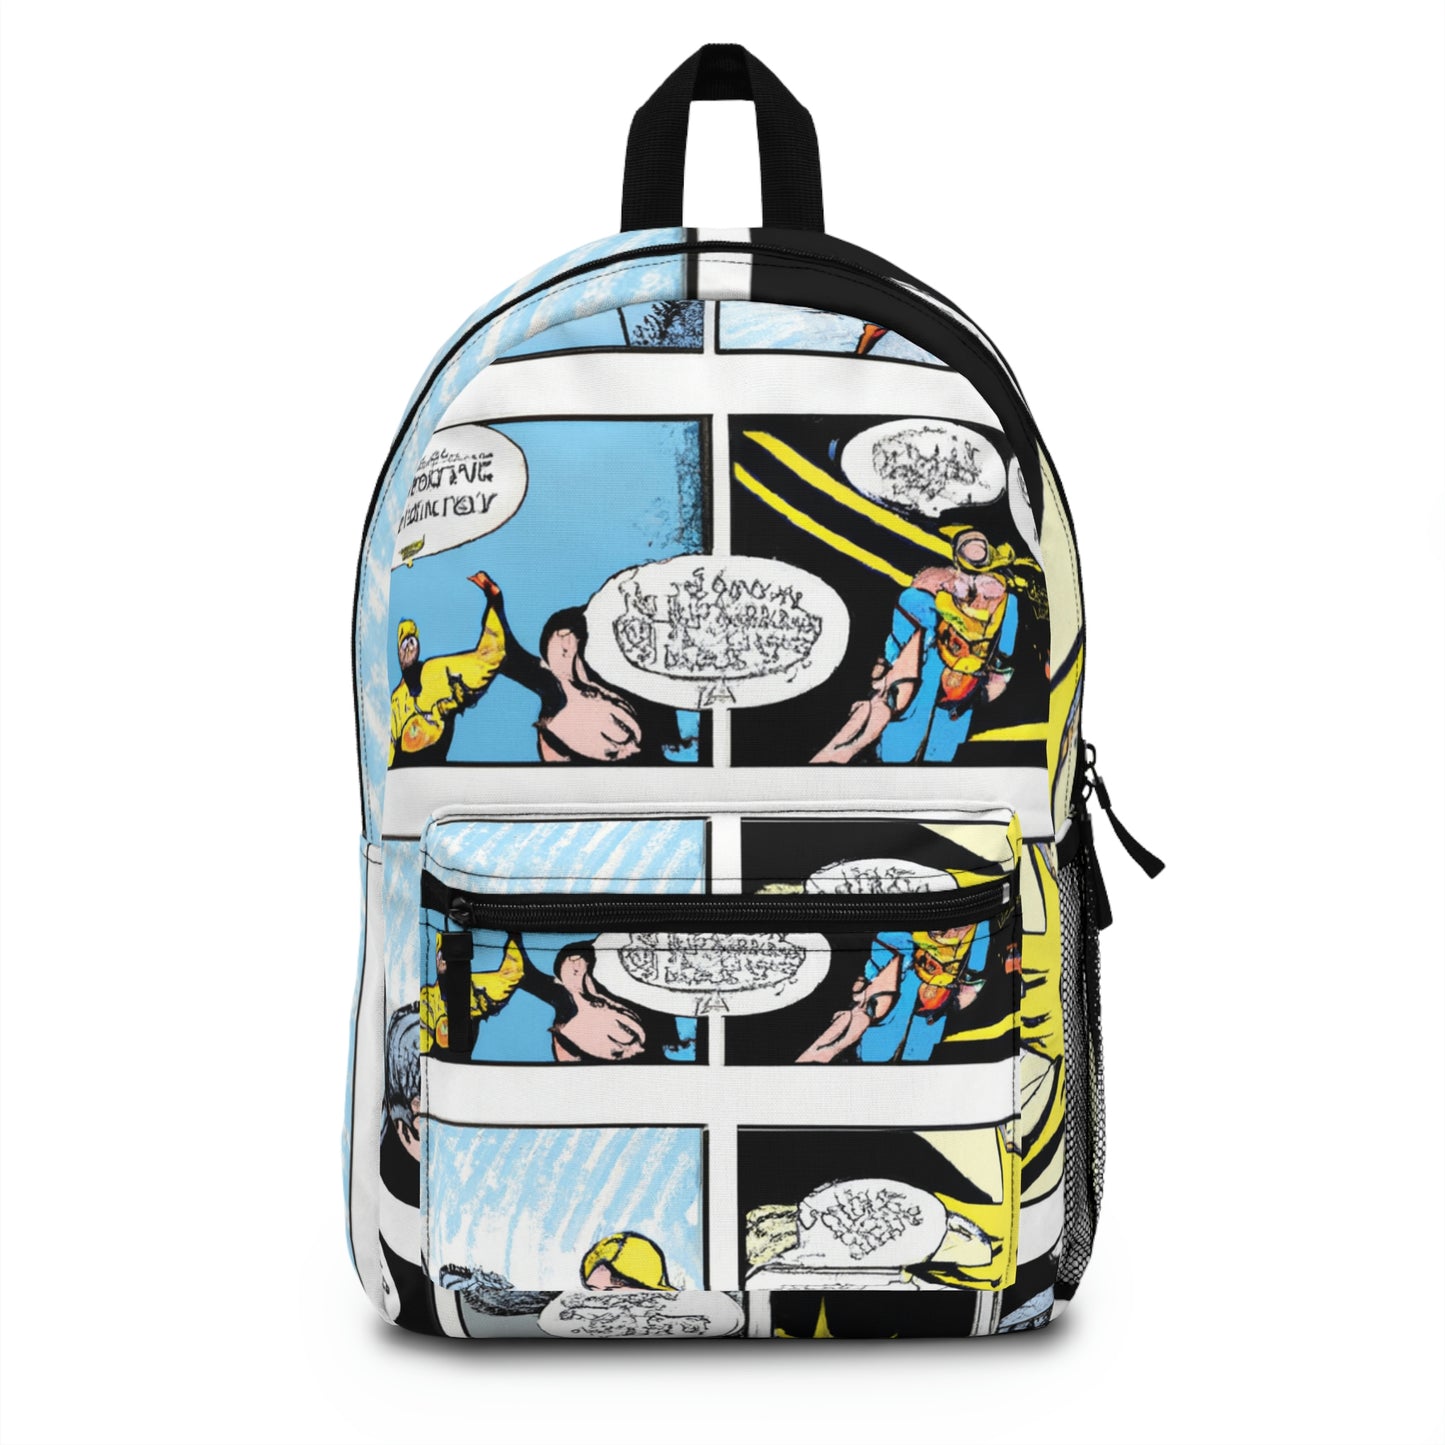 Captain Invincible - Comic Book Backpack